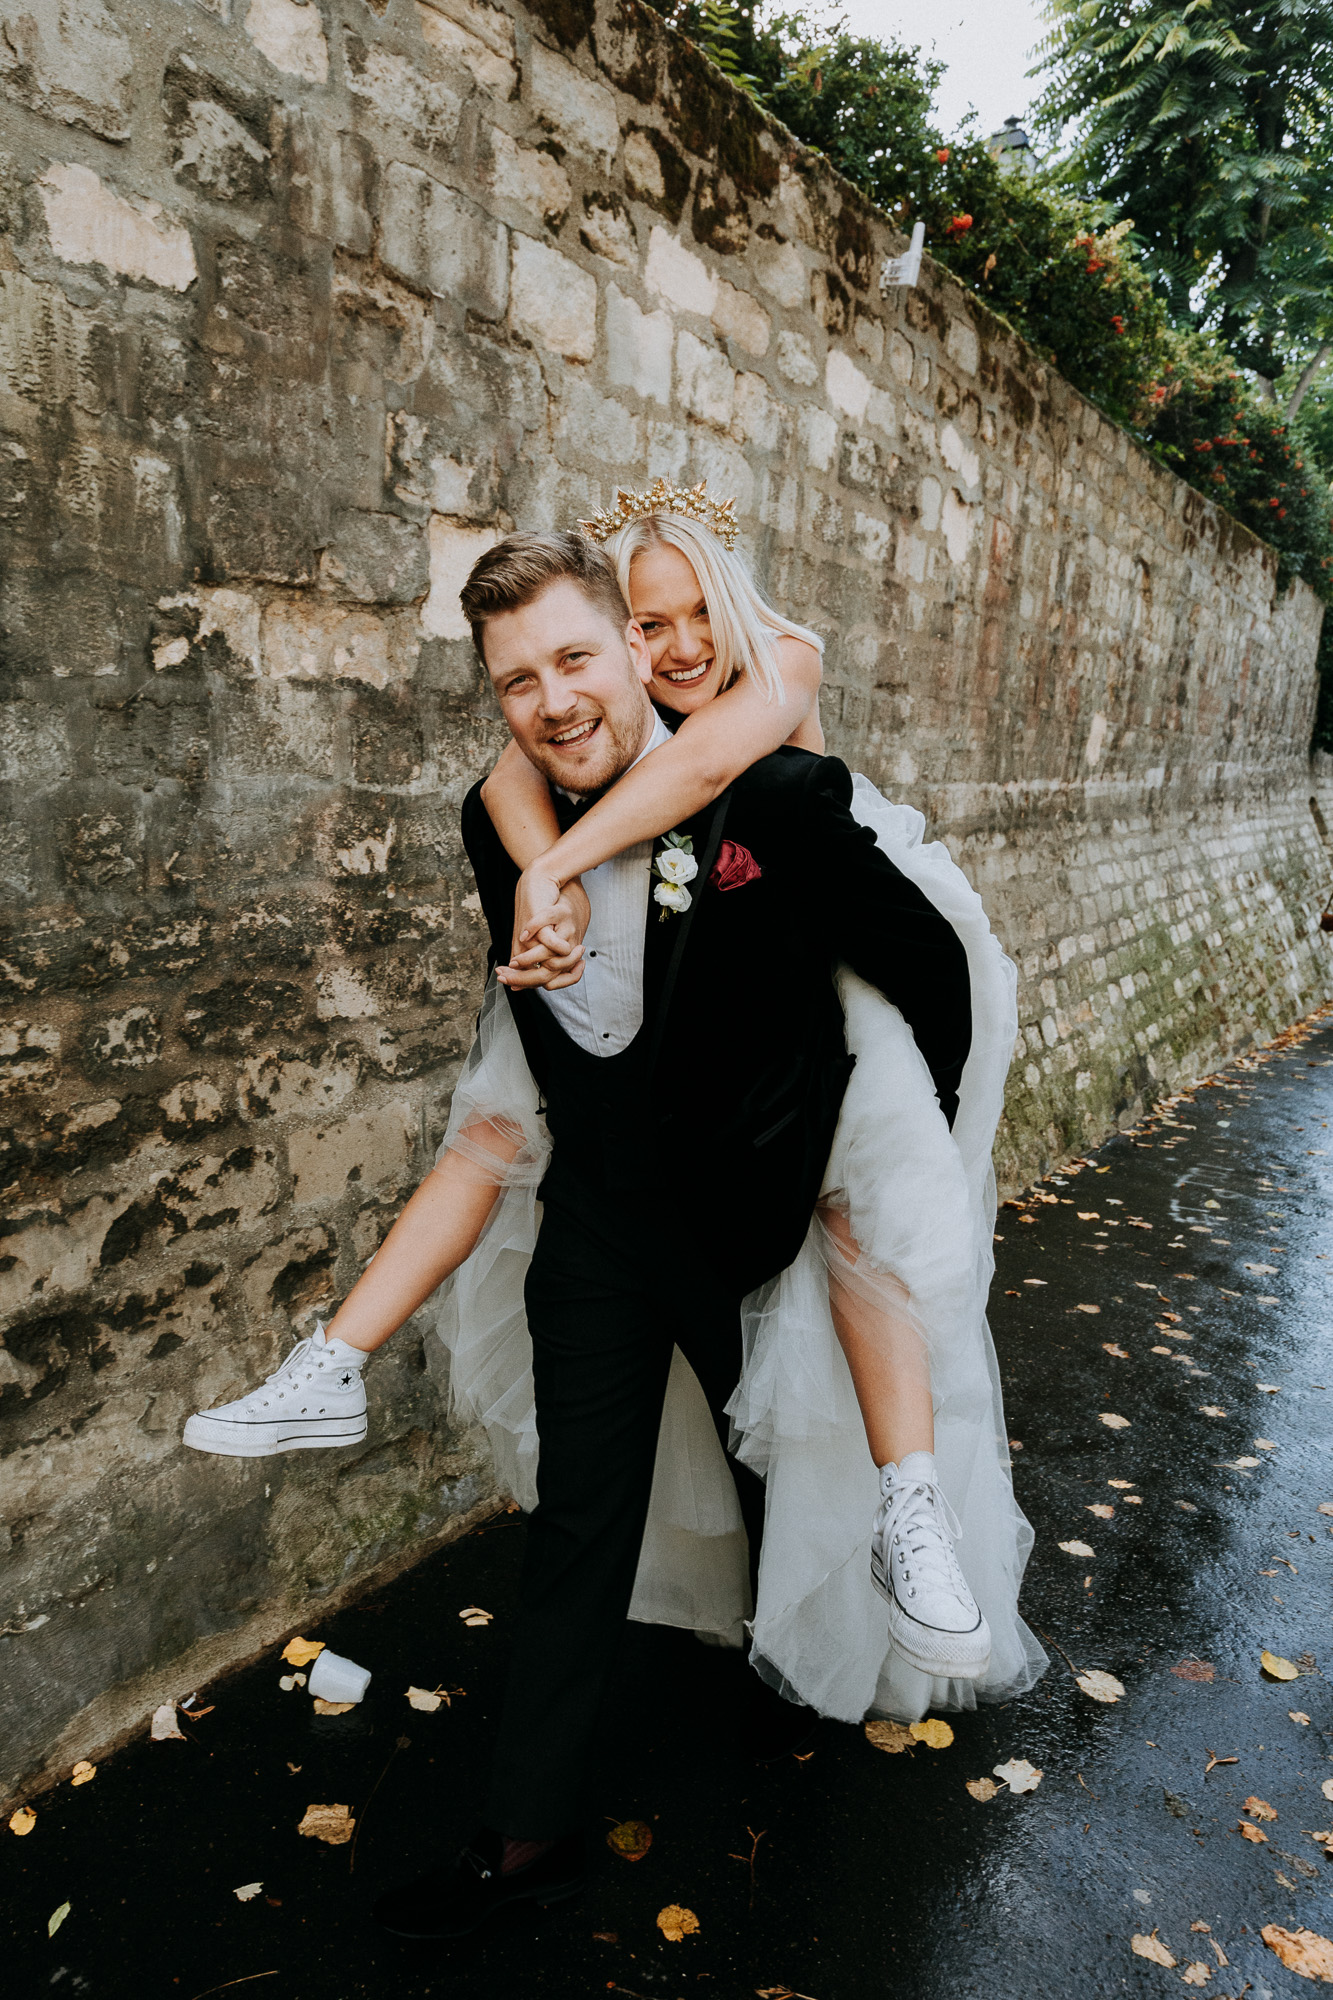 Paris wedding photographer: Montmartre couple photo session time for the bride and groom